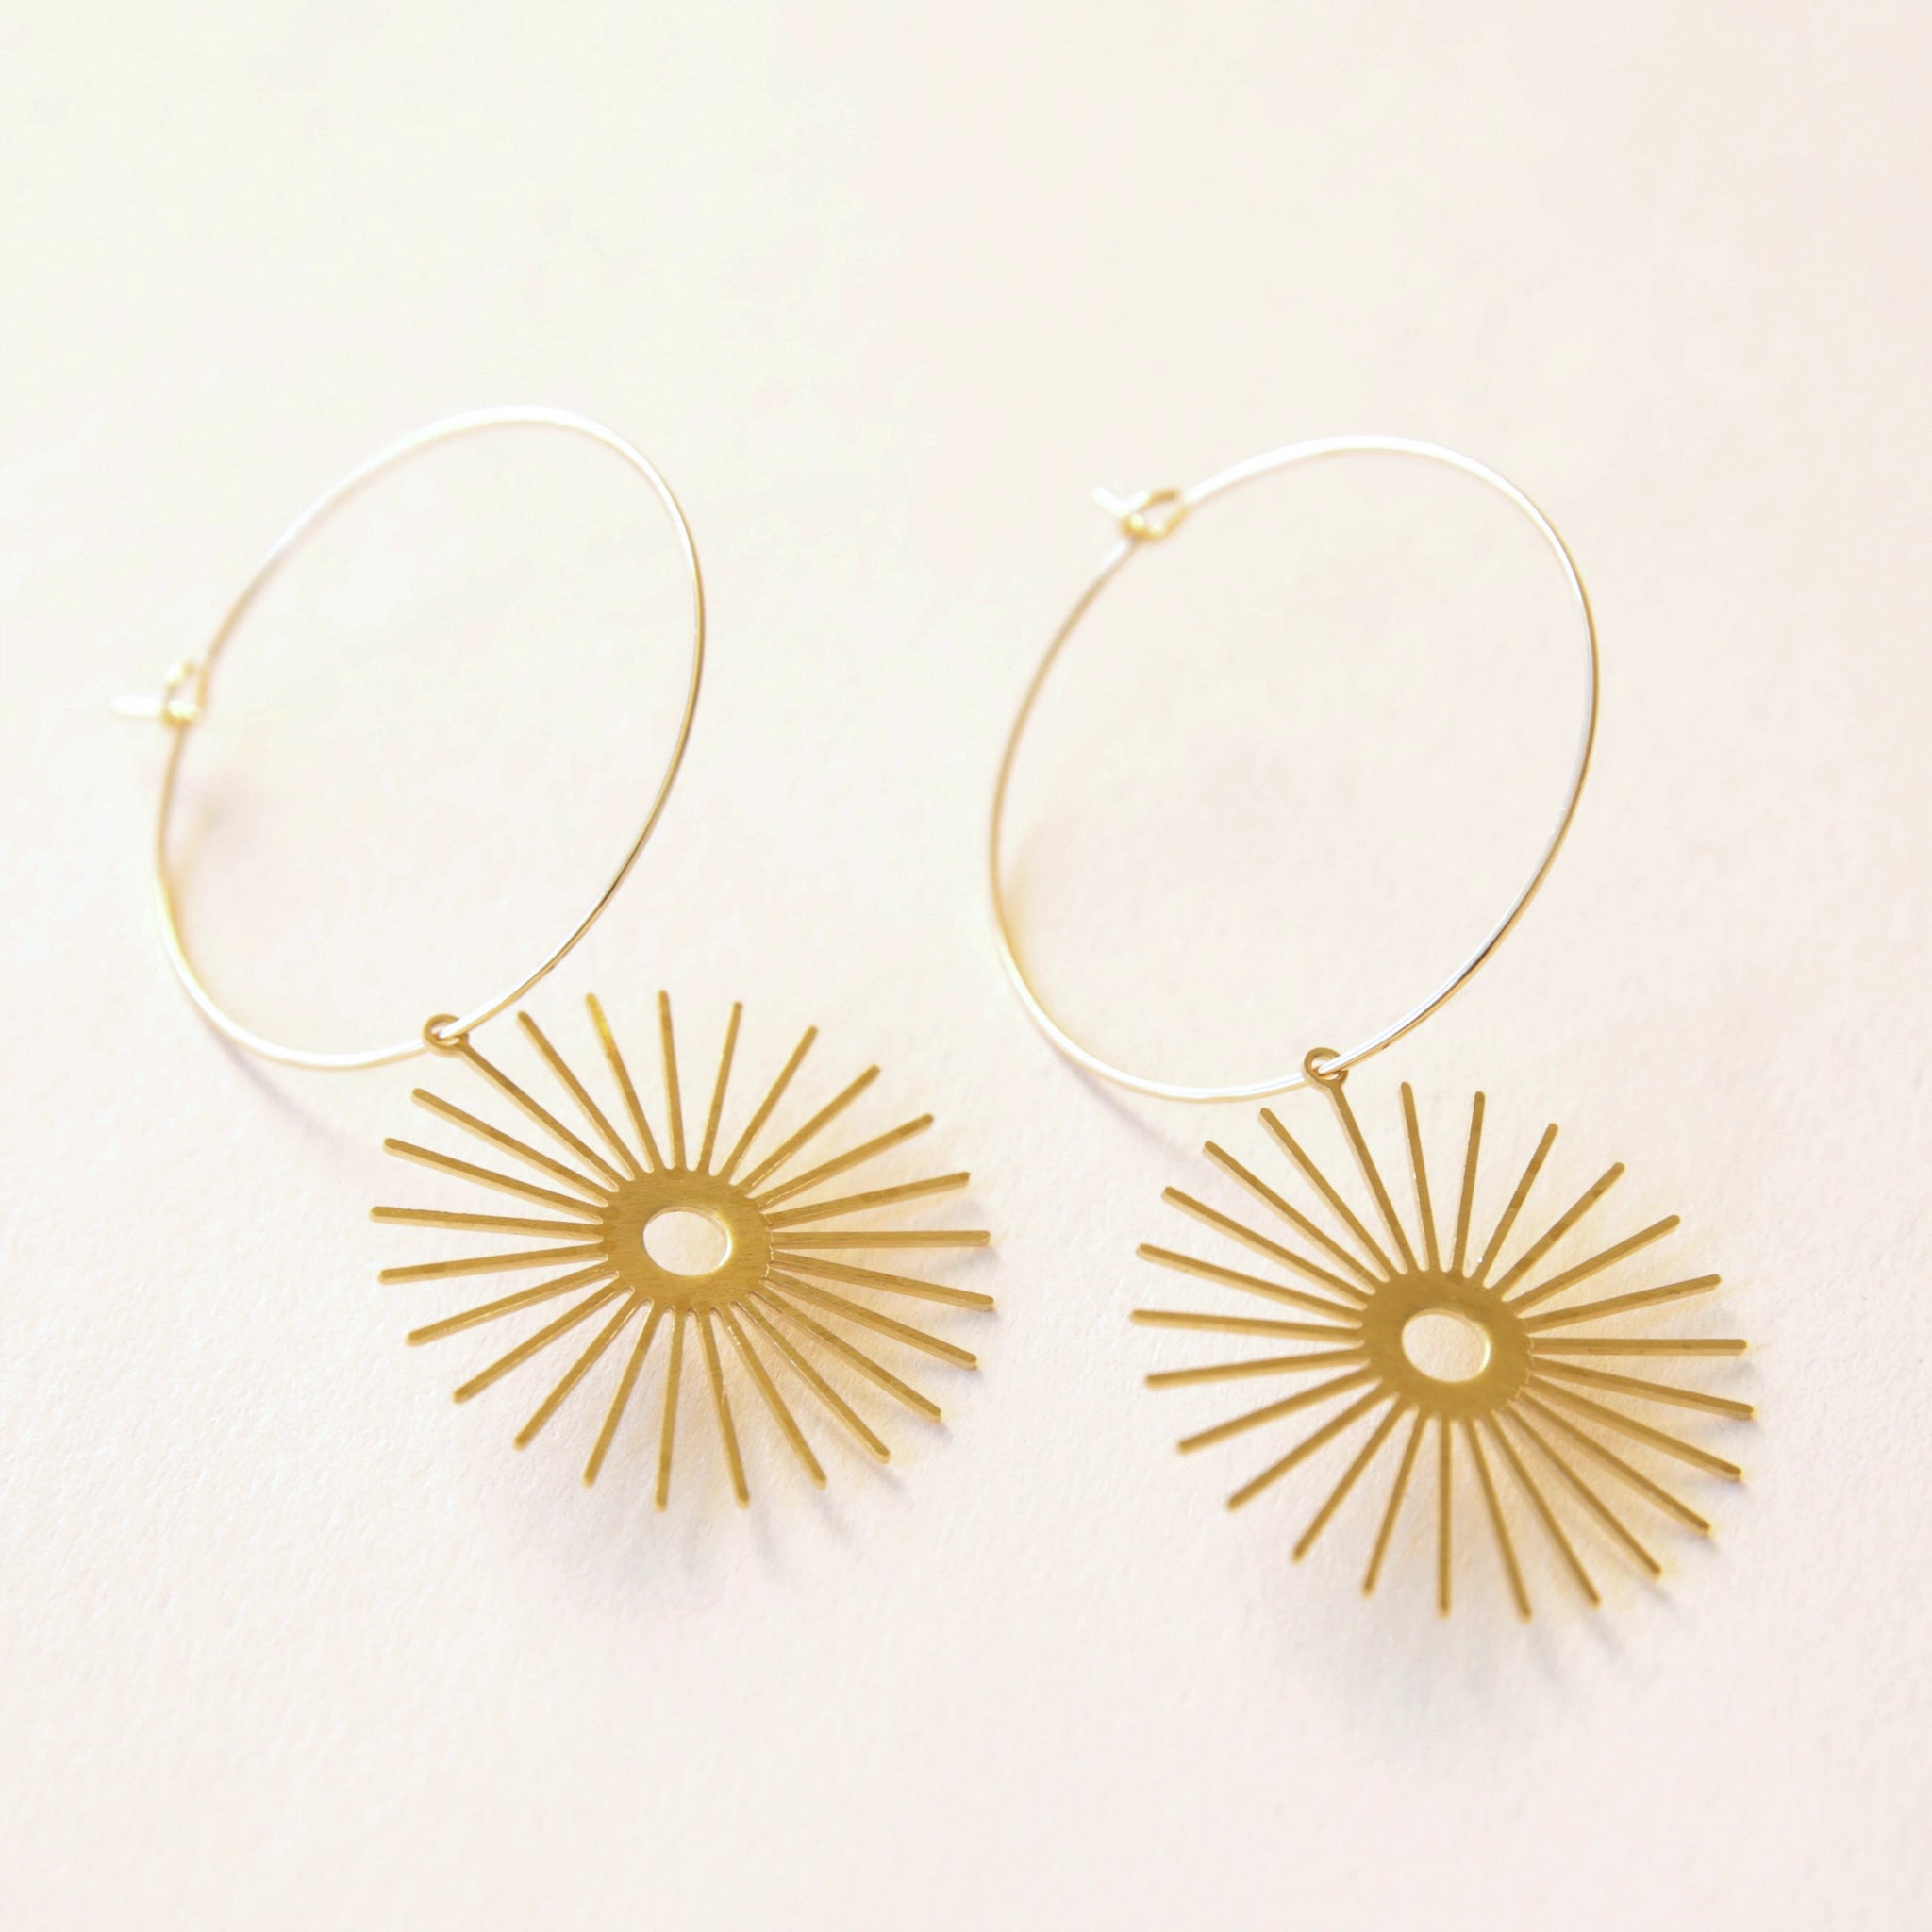 Thin gold hoops with a thin gold sun charm dangling from the bottom.